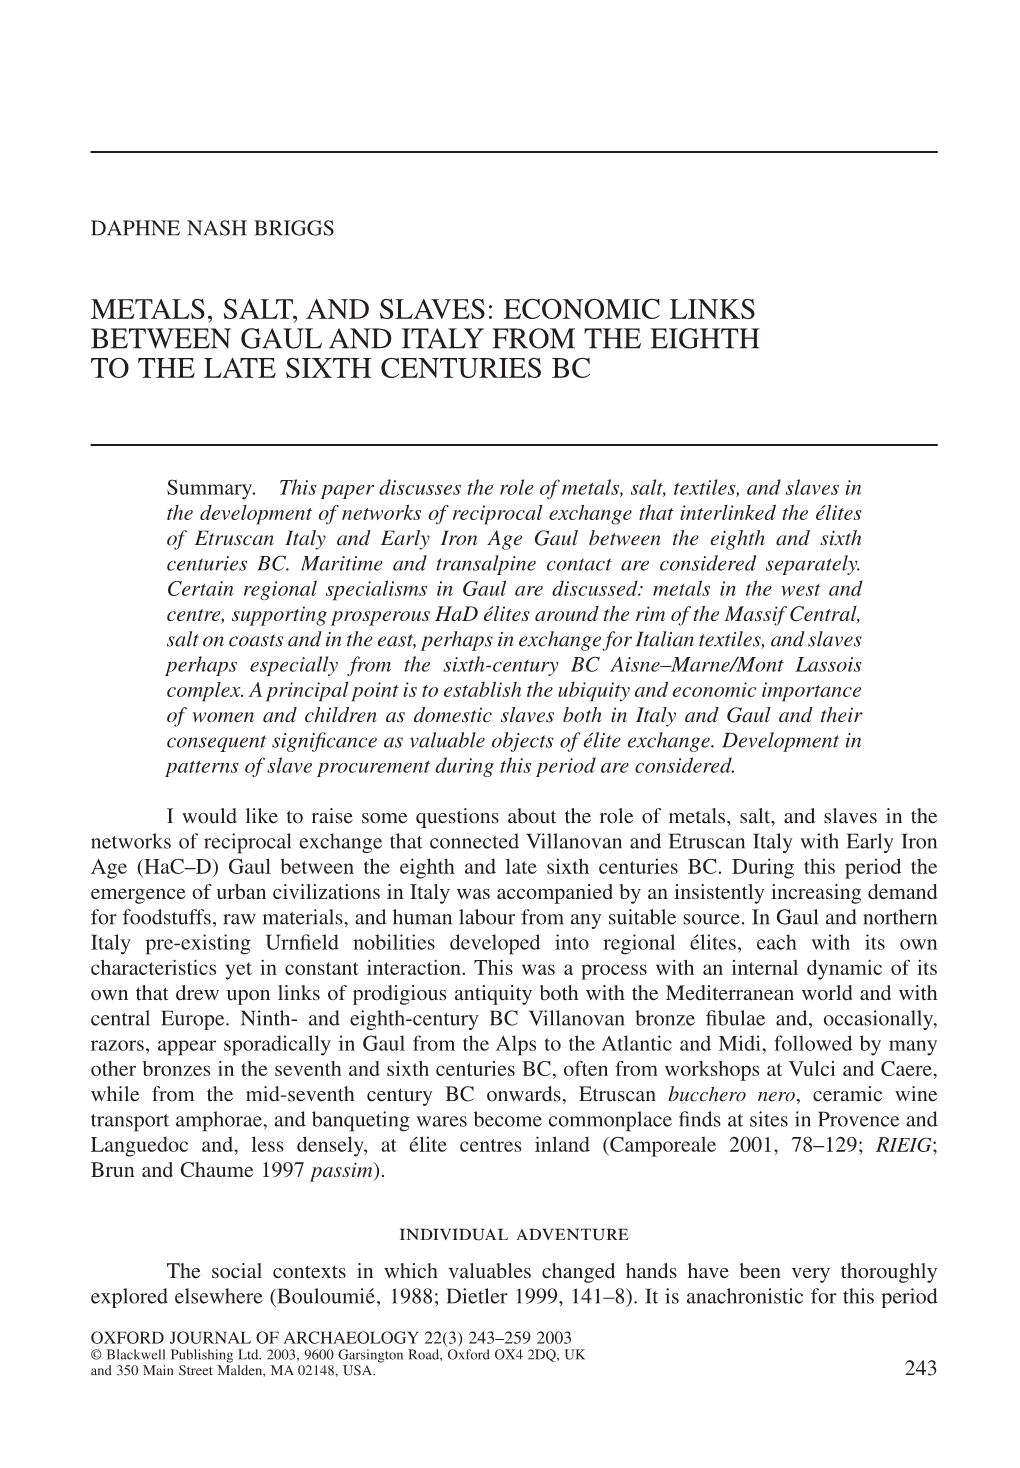 Metals, Salt, and Slaves: Economic Links Between Gaul and Italy from the Eighth to the Late Sixth Centuries Bc